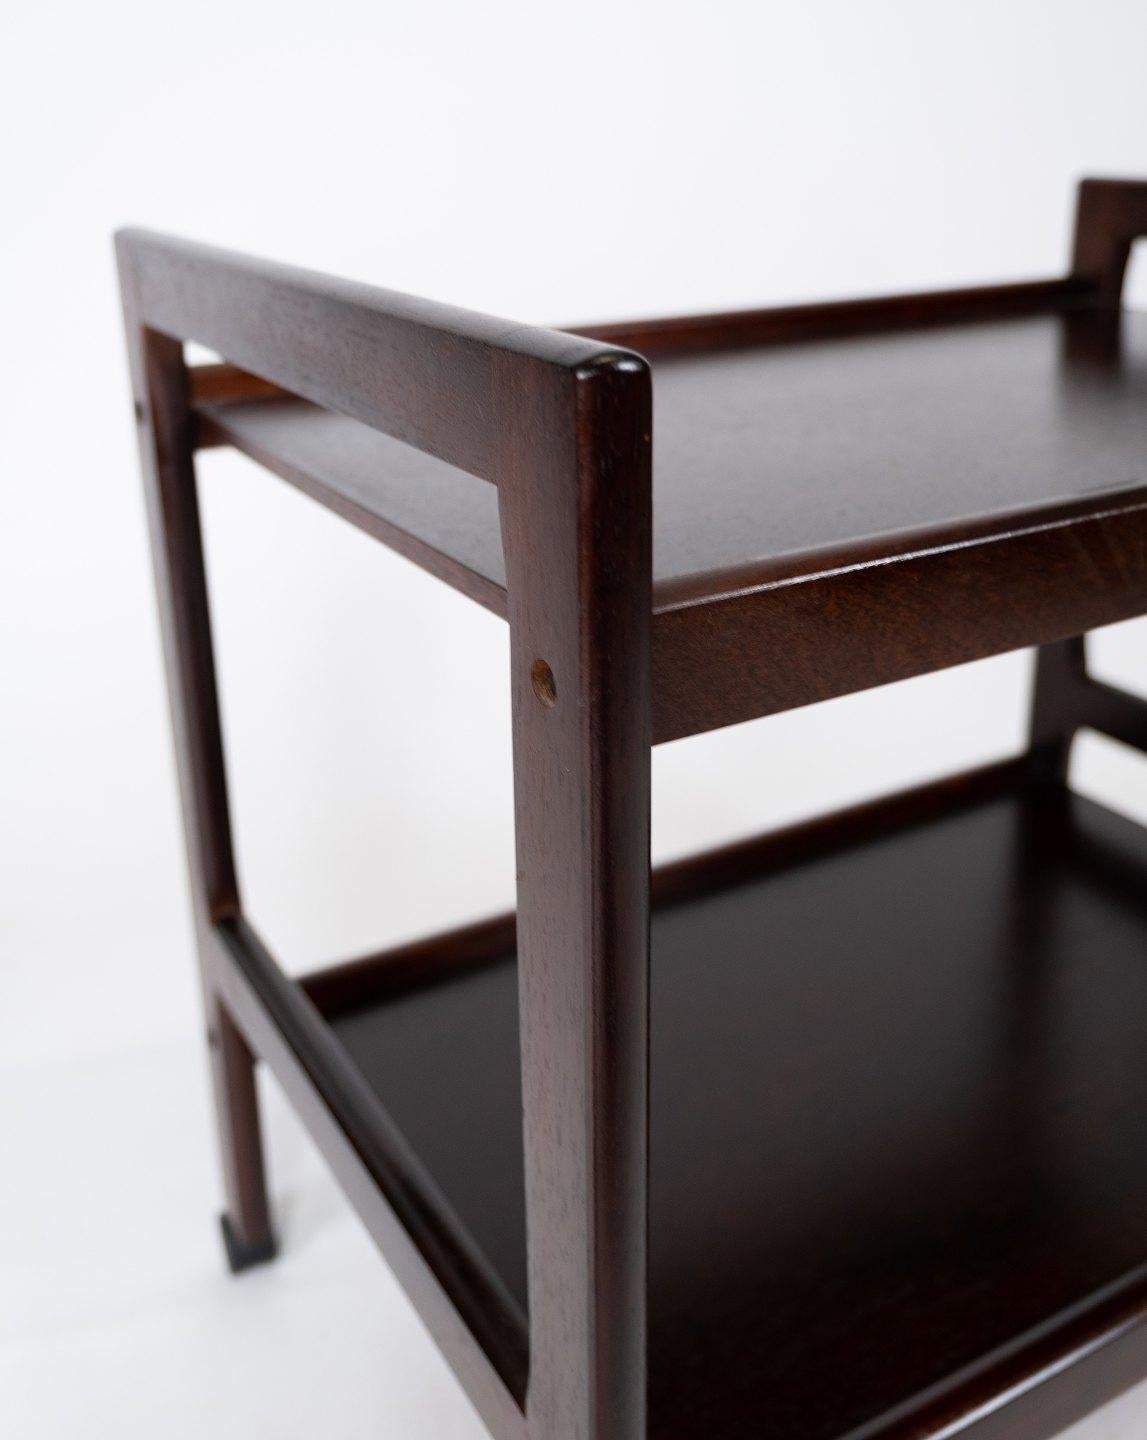 Mid-20th Century Trolley Table in Mahogany of Danish Design from the 1960s